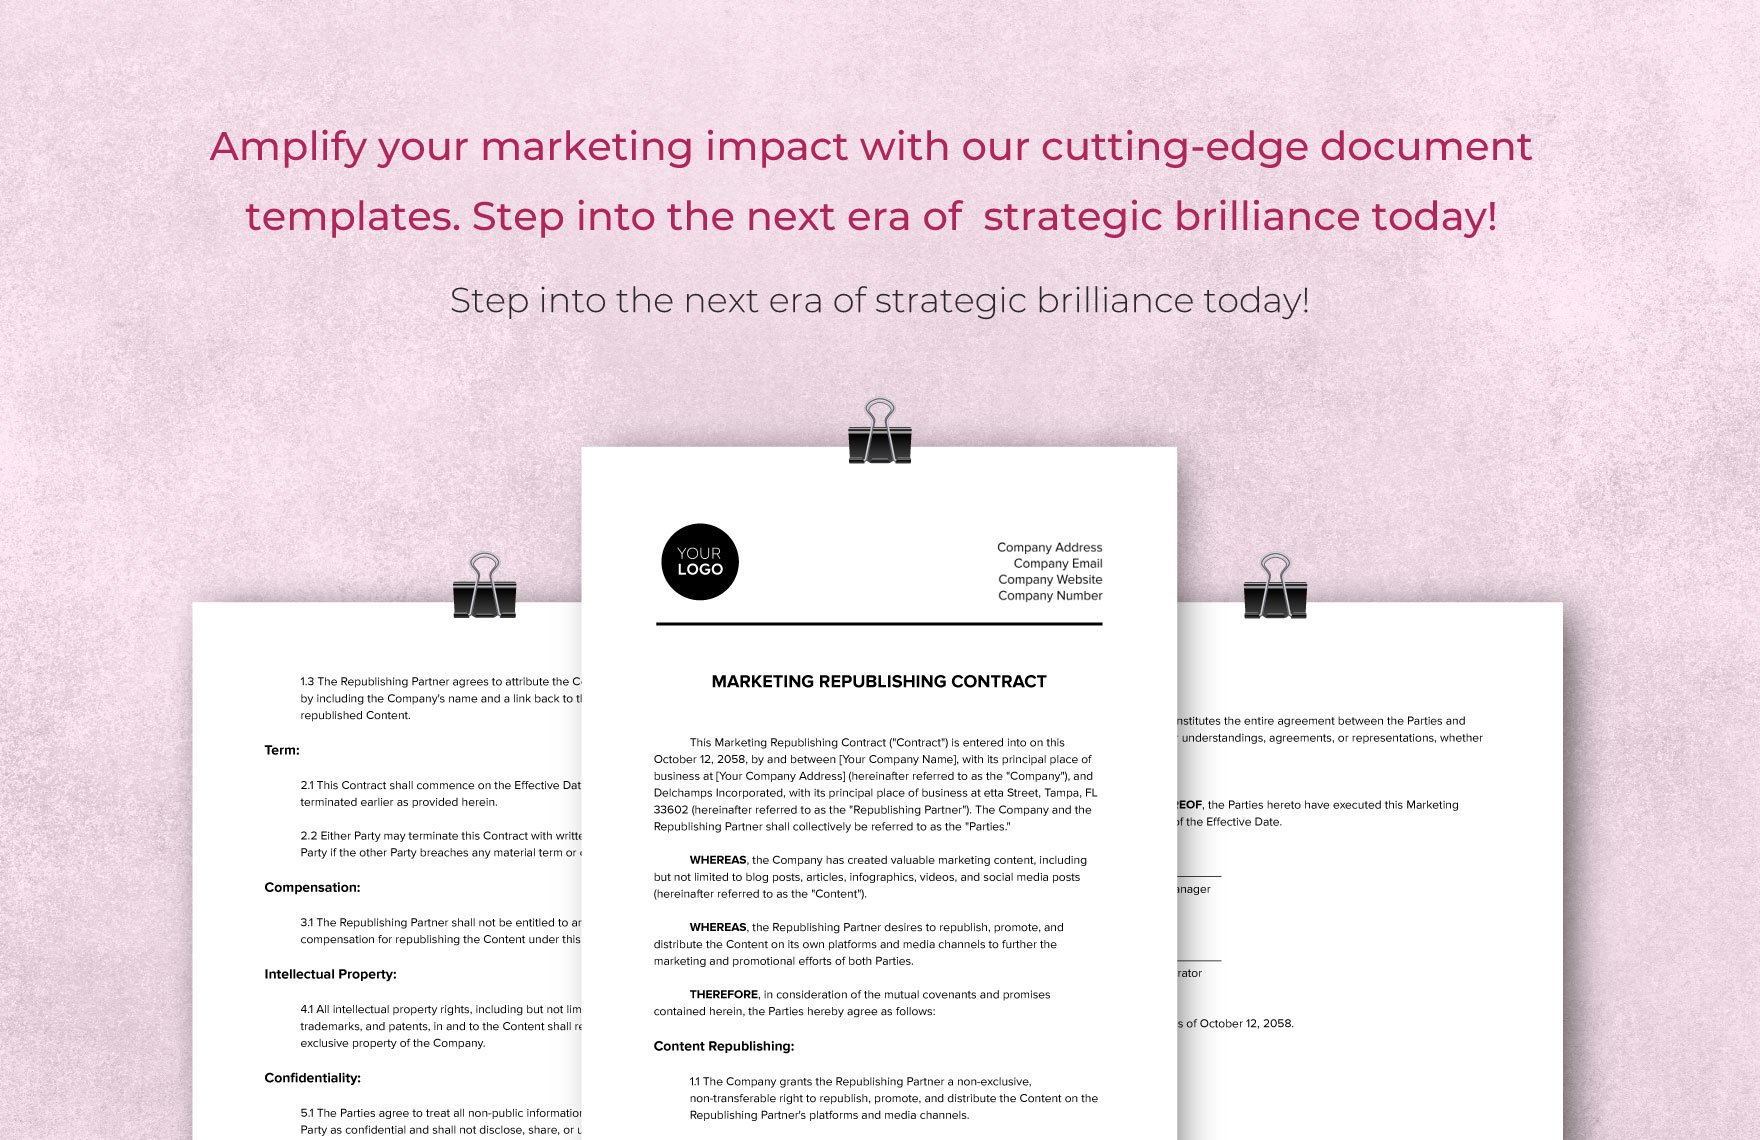 Marketing Republishing Contract Template